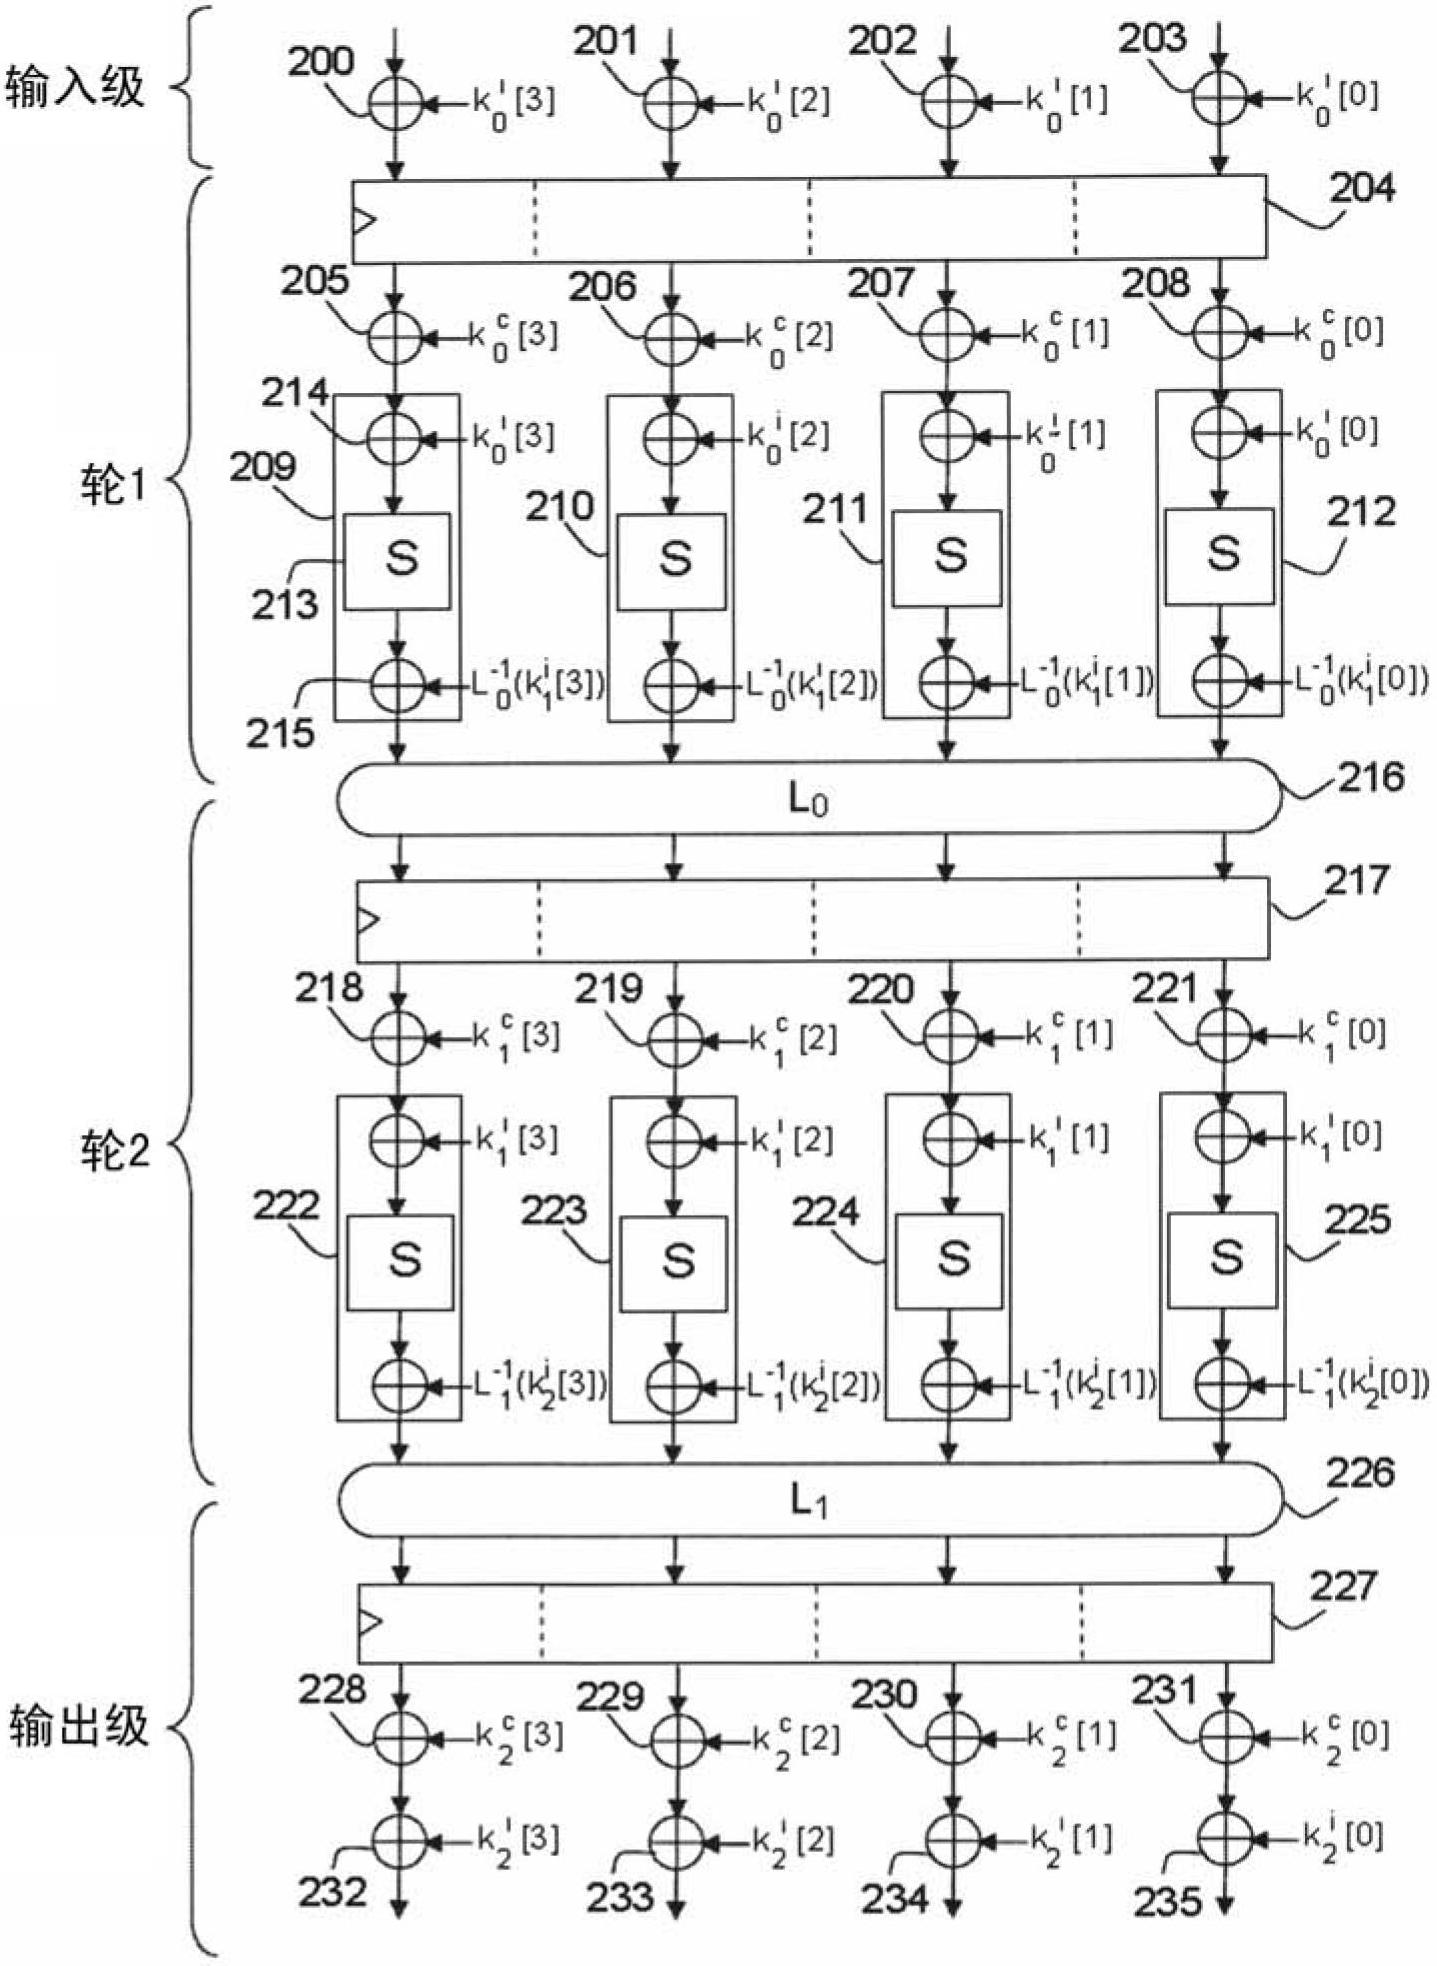 Low-complexity electronic circuit protected by customized masking